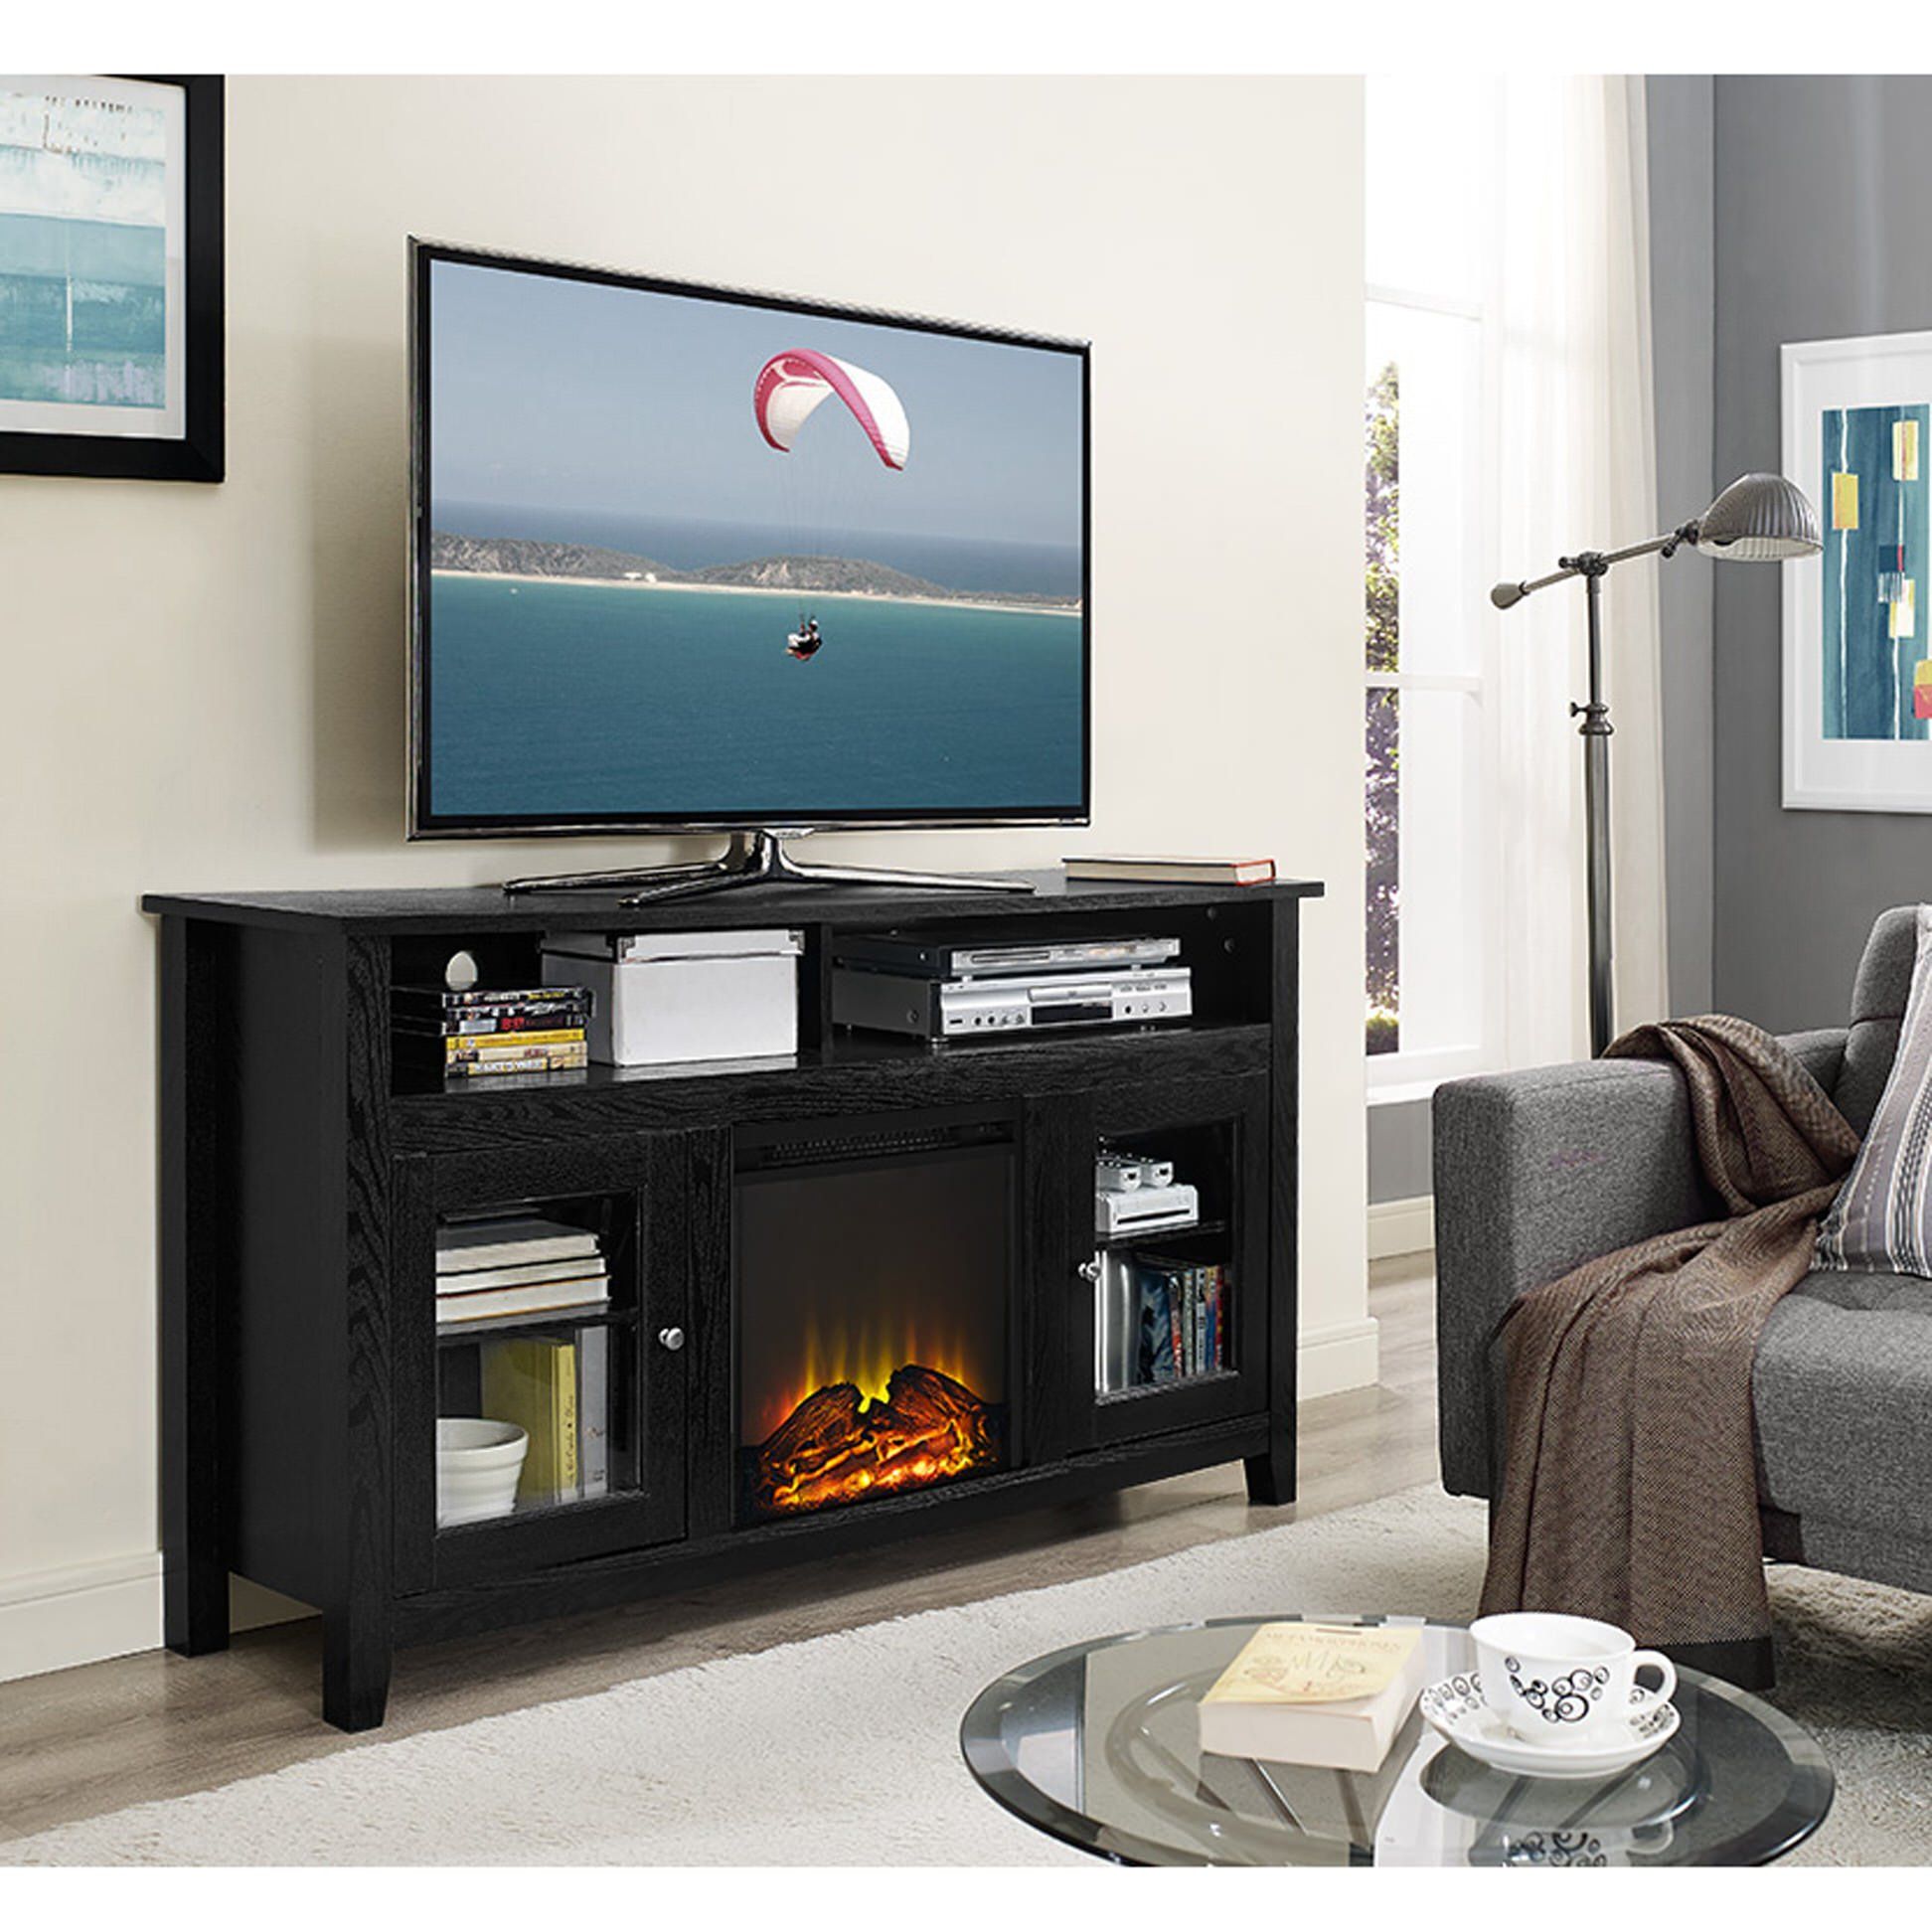 Wasatch 58 Inch Highboy Fireplace Tv Stand – Black In Modern Black Floor Glass Tv Stands For Tvs Up To 70 Inch (View 9 of 15)